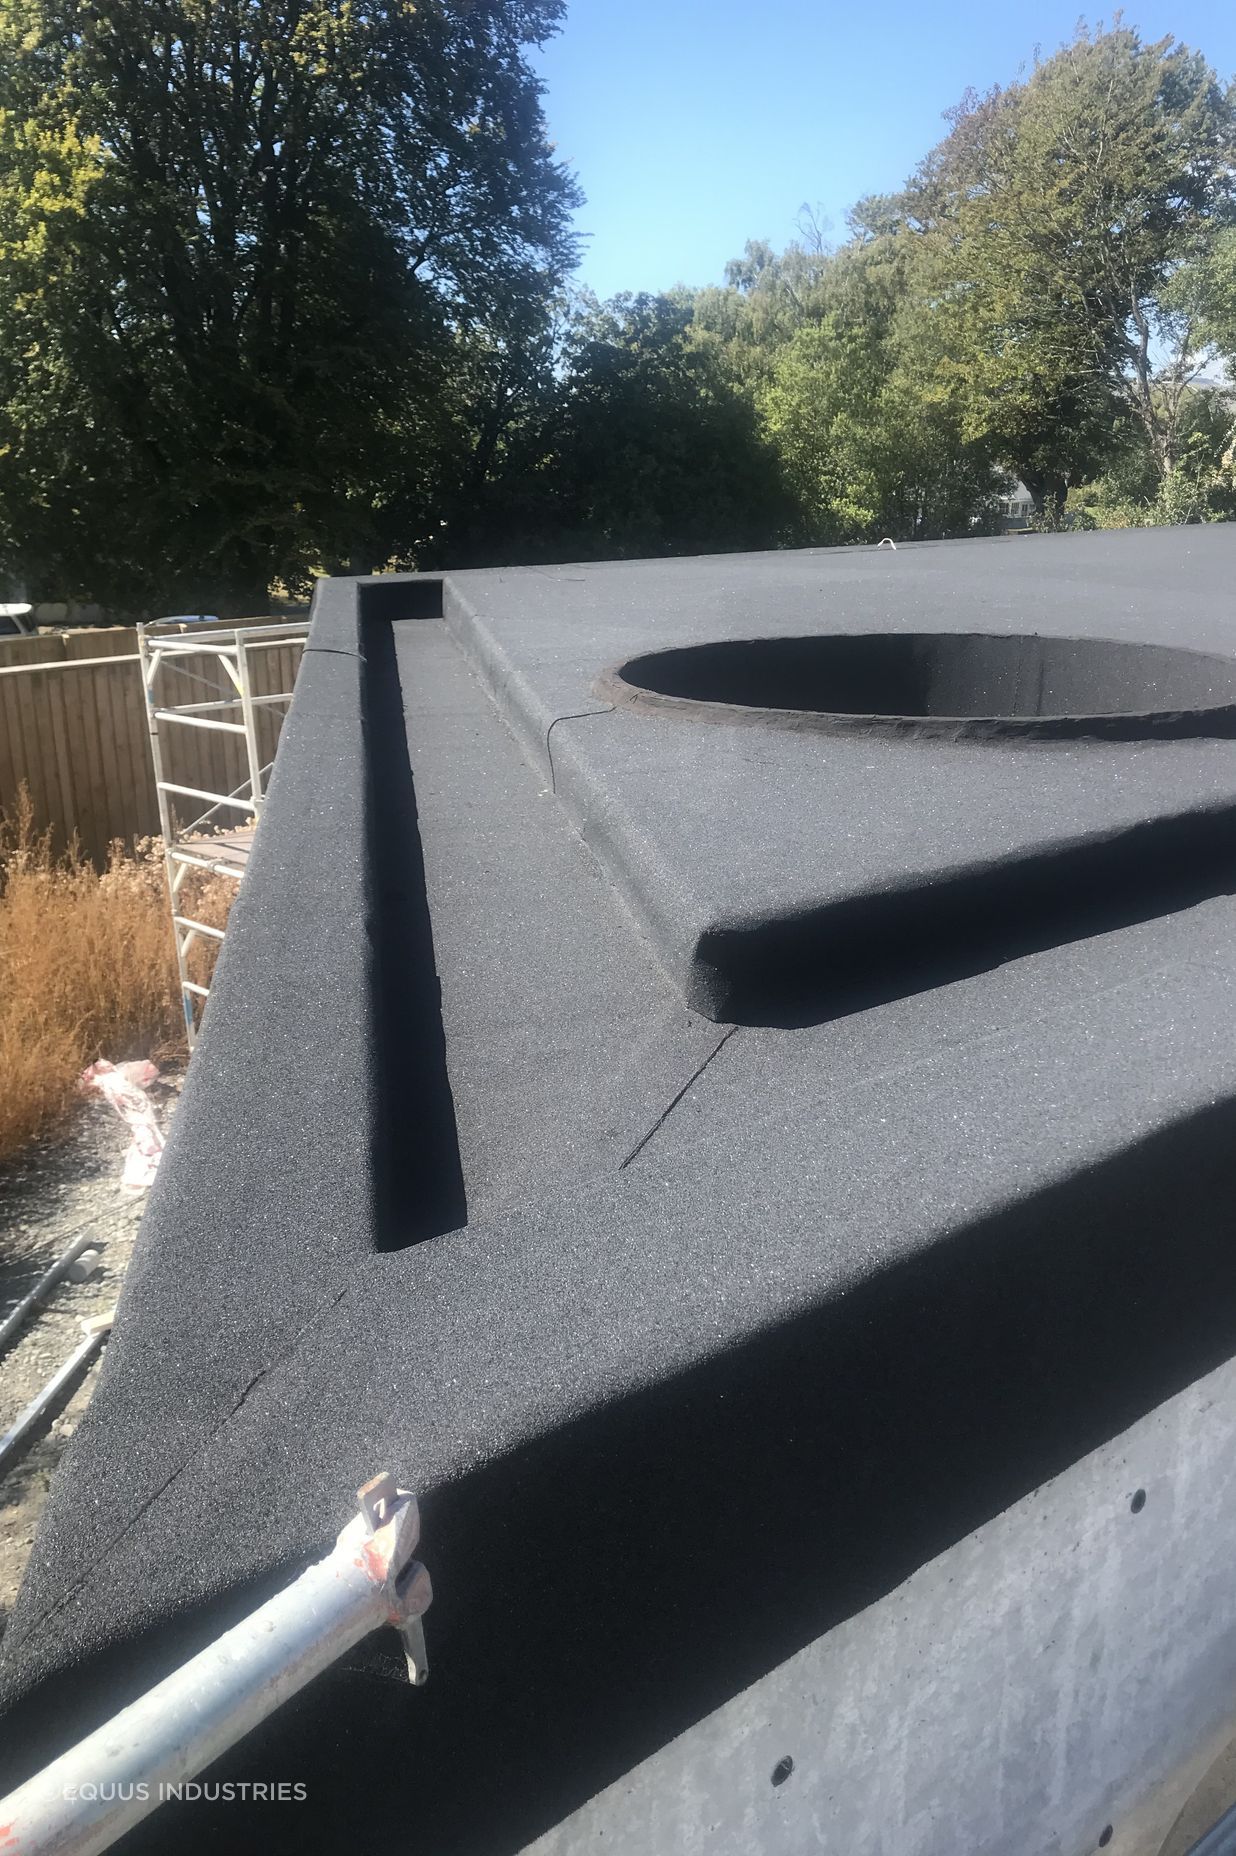 The roof has a lot of unique detailing, installed by a team of skilled roofers and waterproofers from Canterbury Waterproofing.